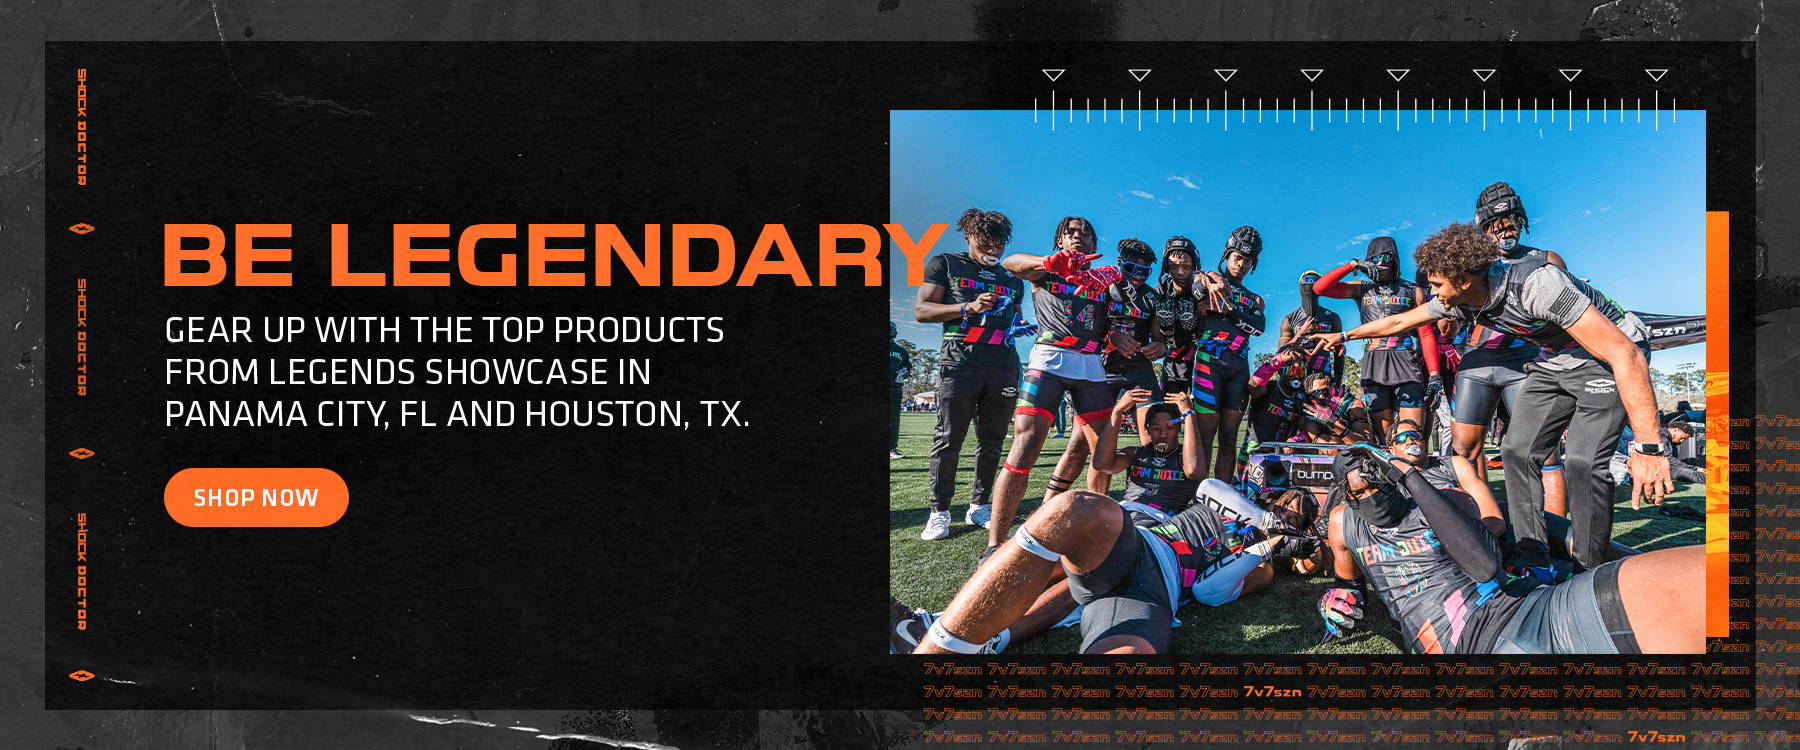 Be Legendary. Gear up with the top products from legends showcase in panama city, fl and houston, tx. SHOP NOW.